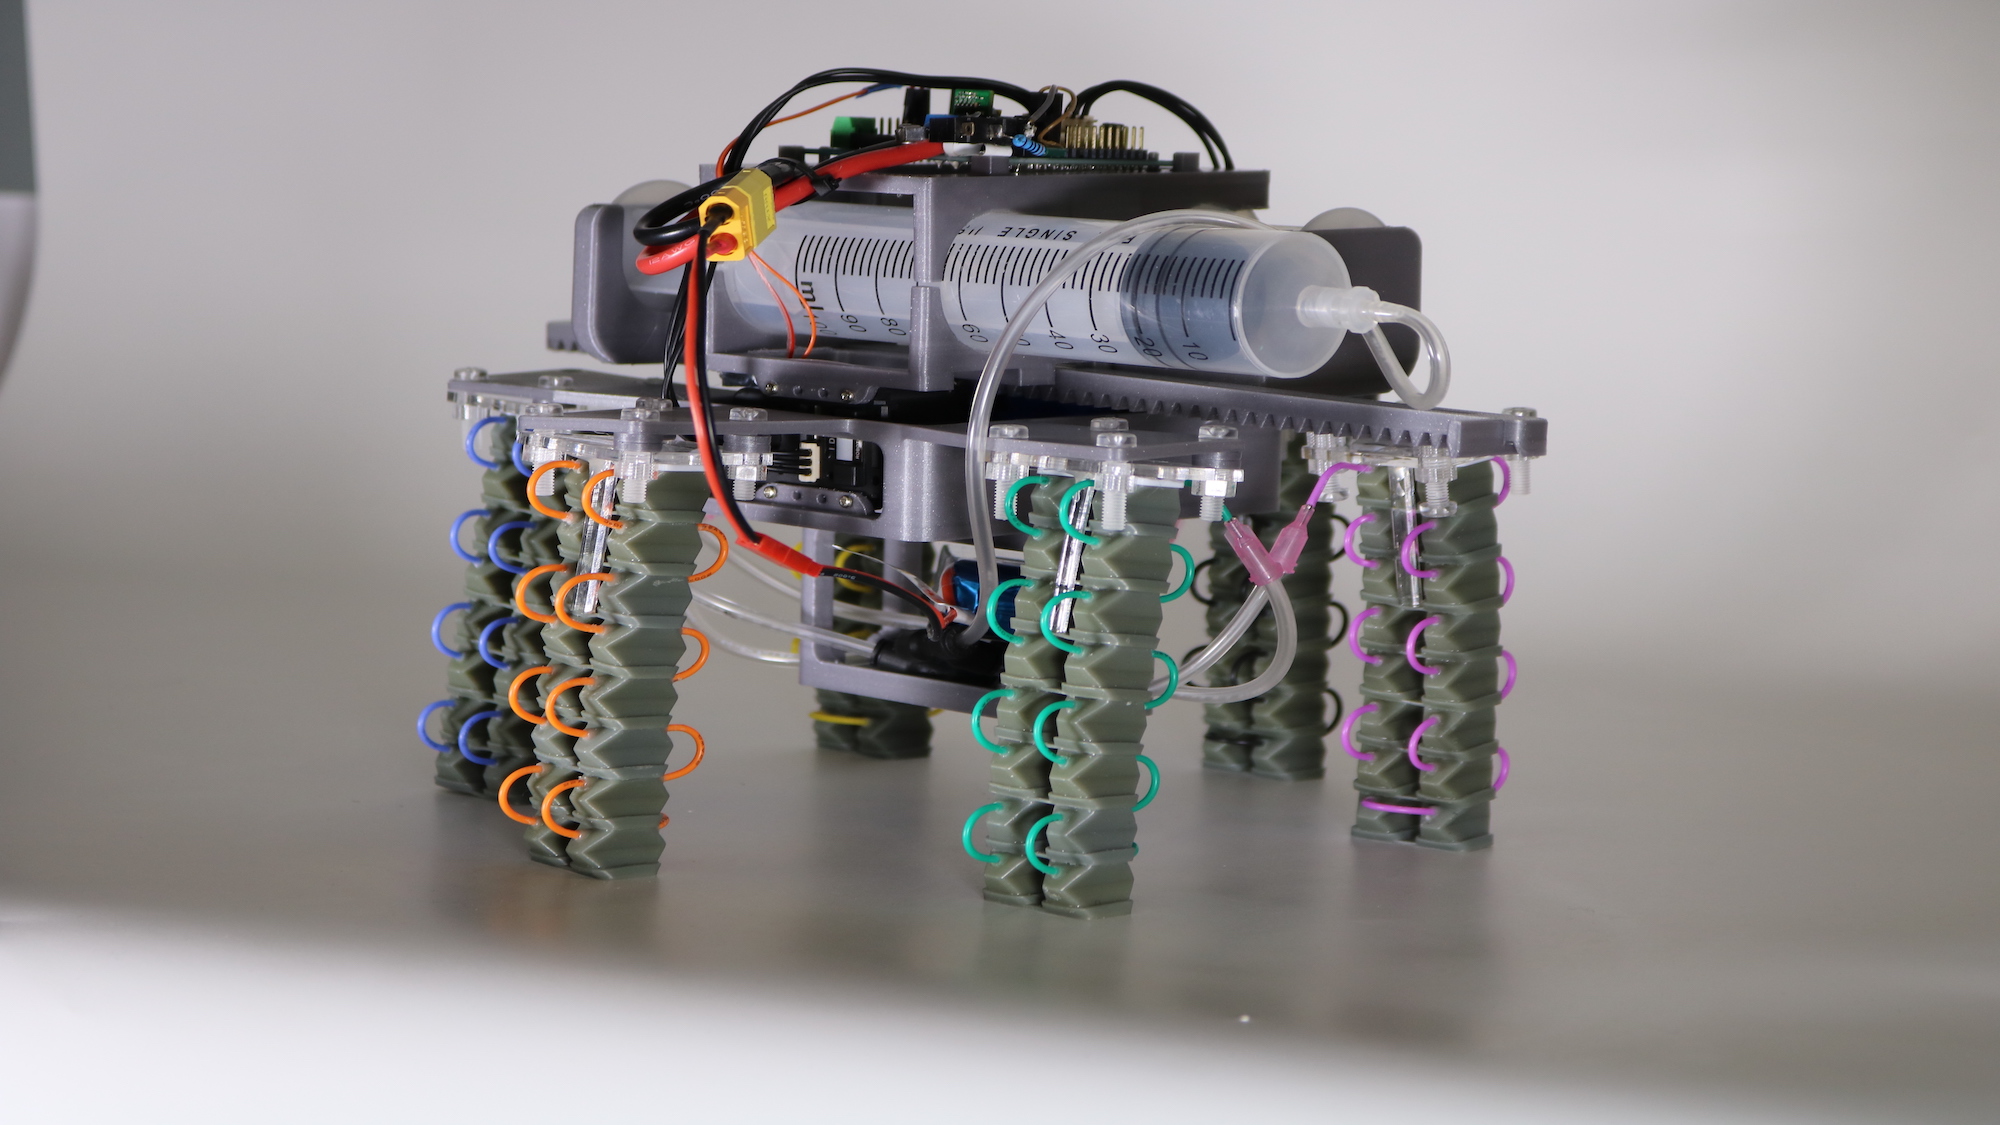 A squishy new robot uses syringes and physics to mosey along